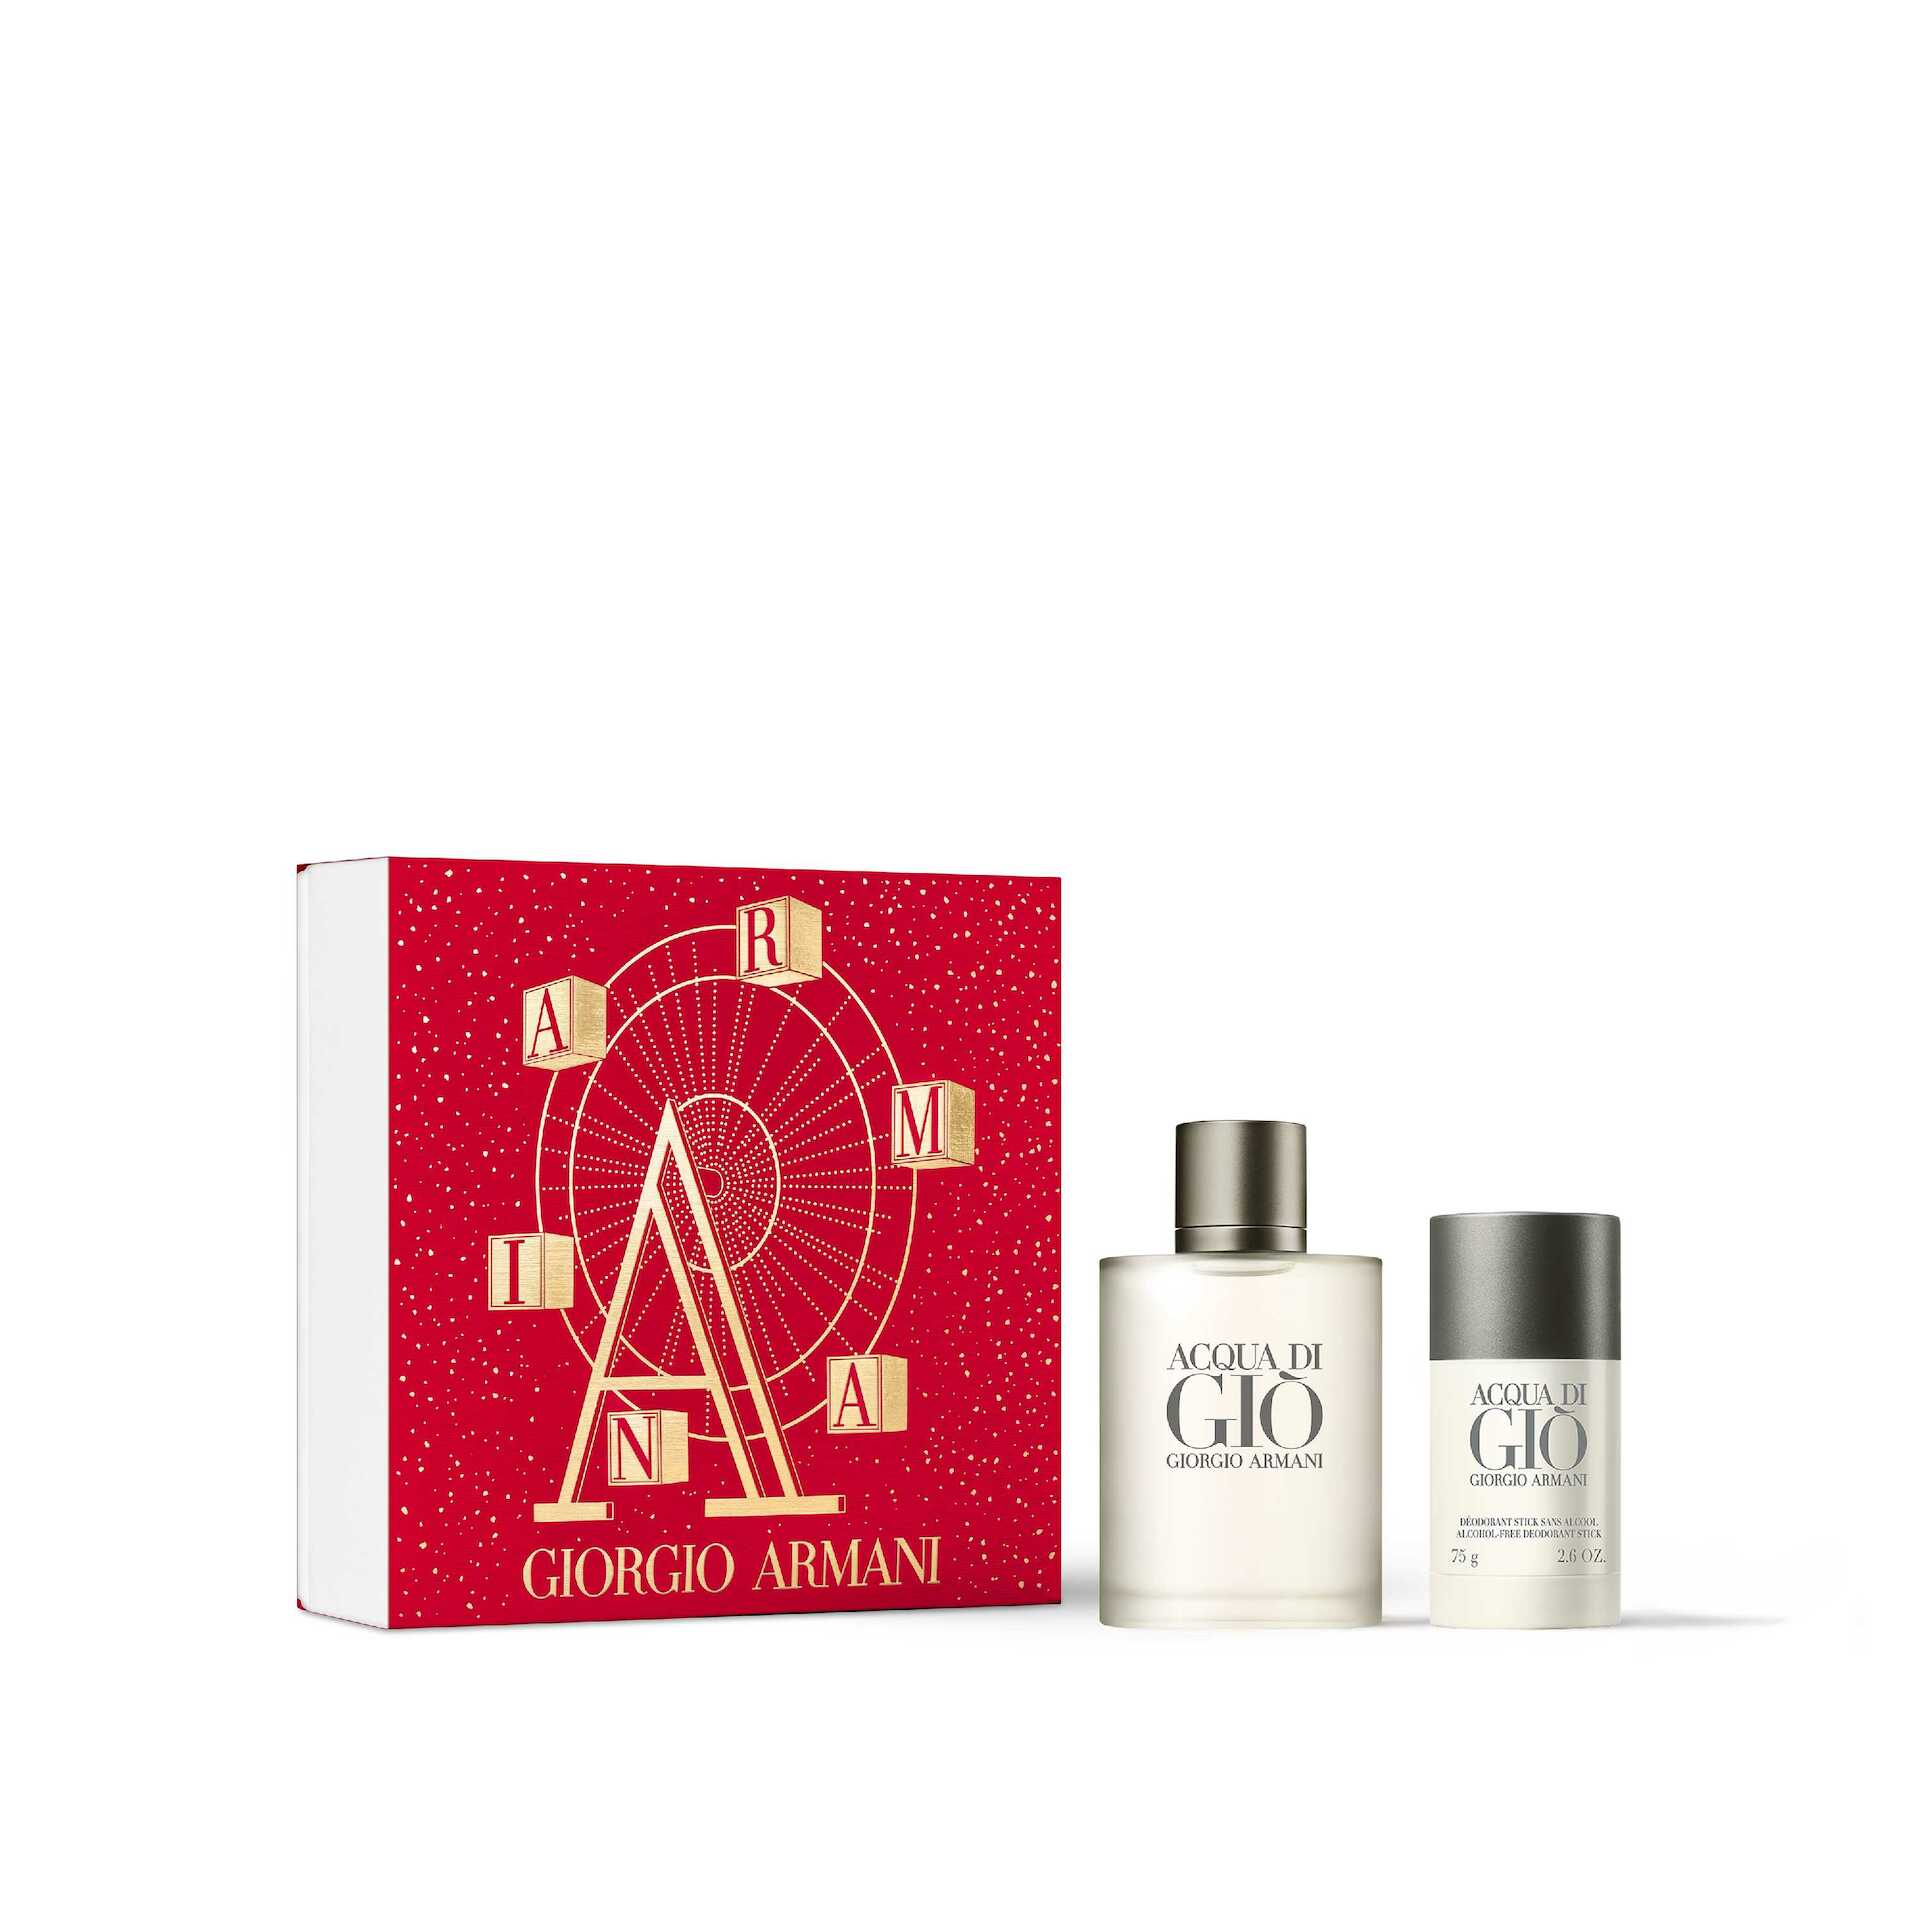 Celebration & Occasion Supplies Gift Wrapping & Supplies Giorgio Armani  EMPTY Giorgio Armani Acqua Di Gio Red Fragrance Gift Box 